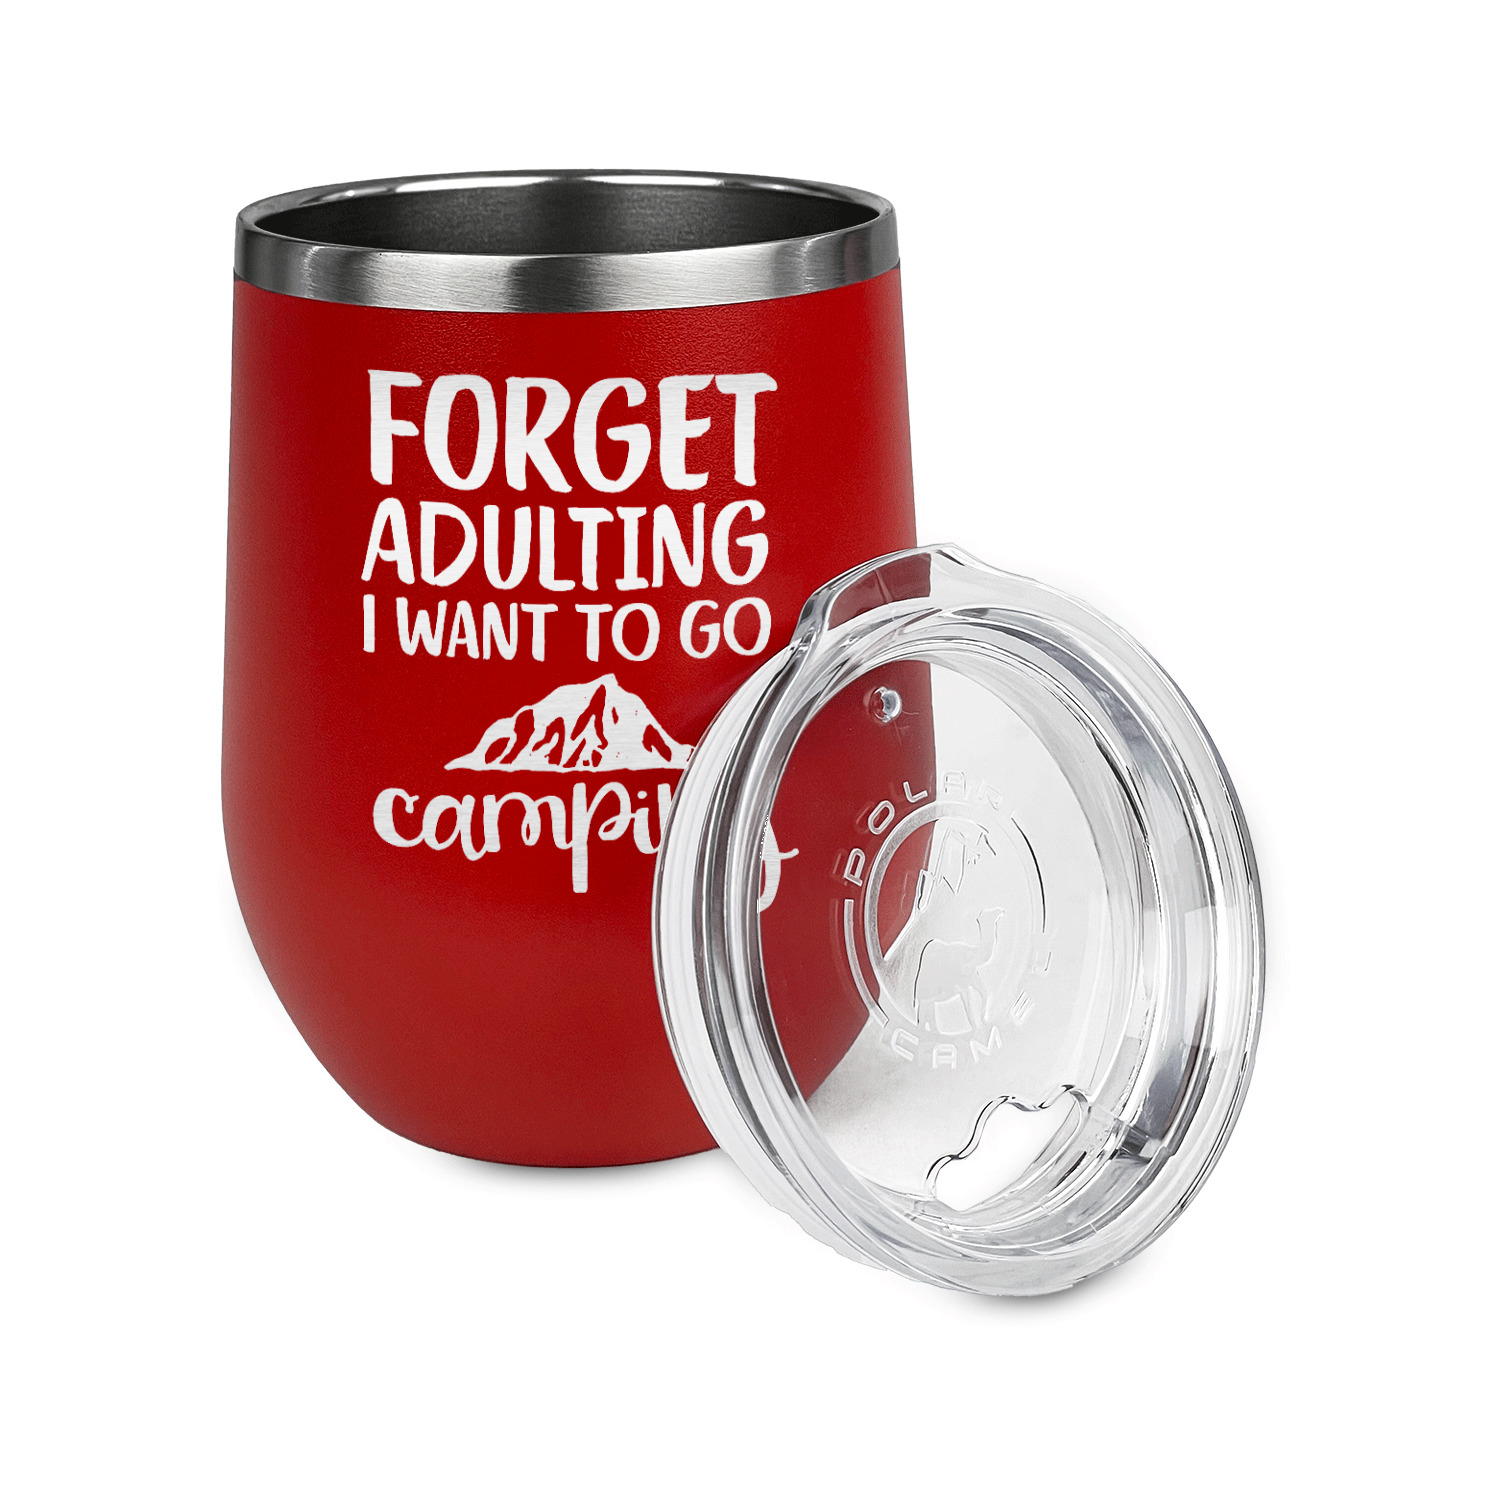 https://www.youcustomizeit.com/common/MAKE/1030867/Camping-Quotes-Sayings-Stainless-Wine-Tumblers-Red-Double-Sided-Alt-View.jpg?lm=1644249831